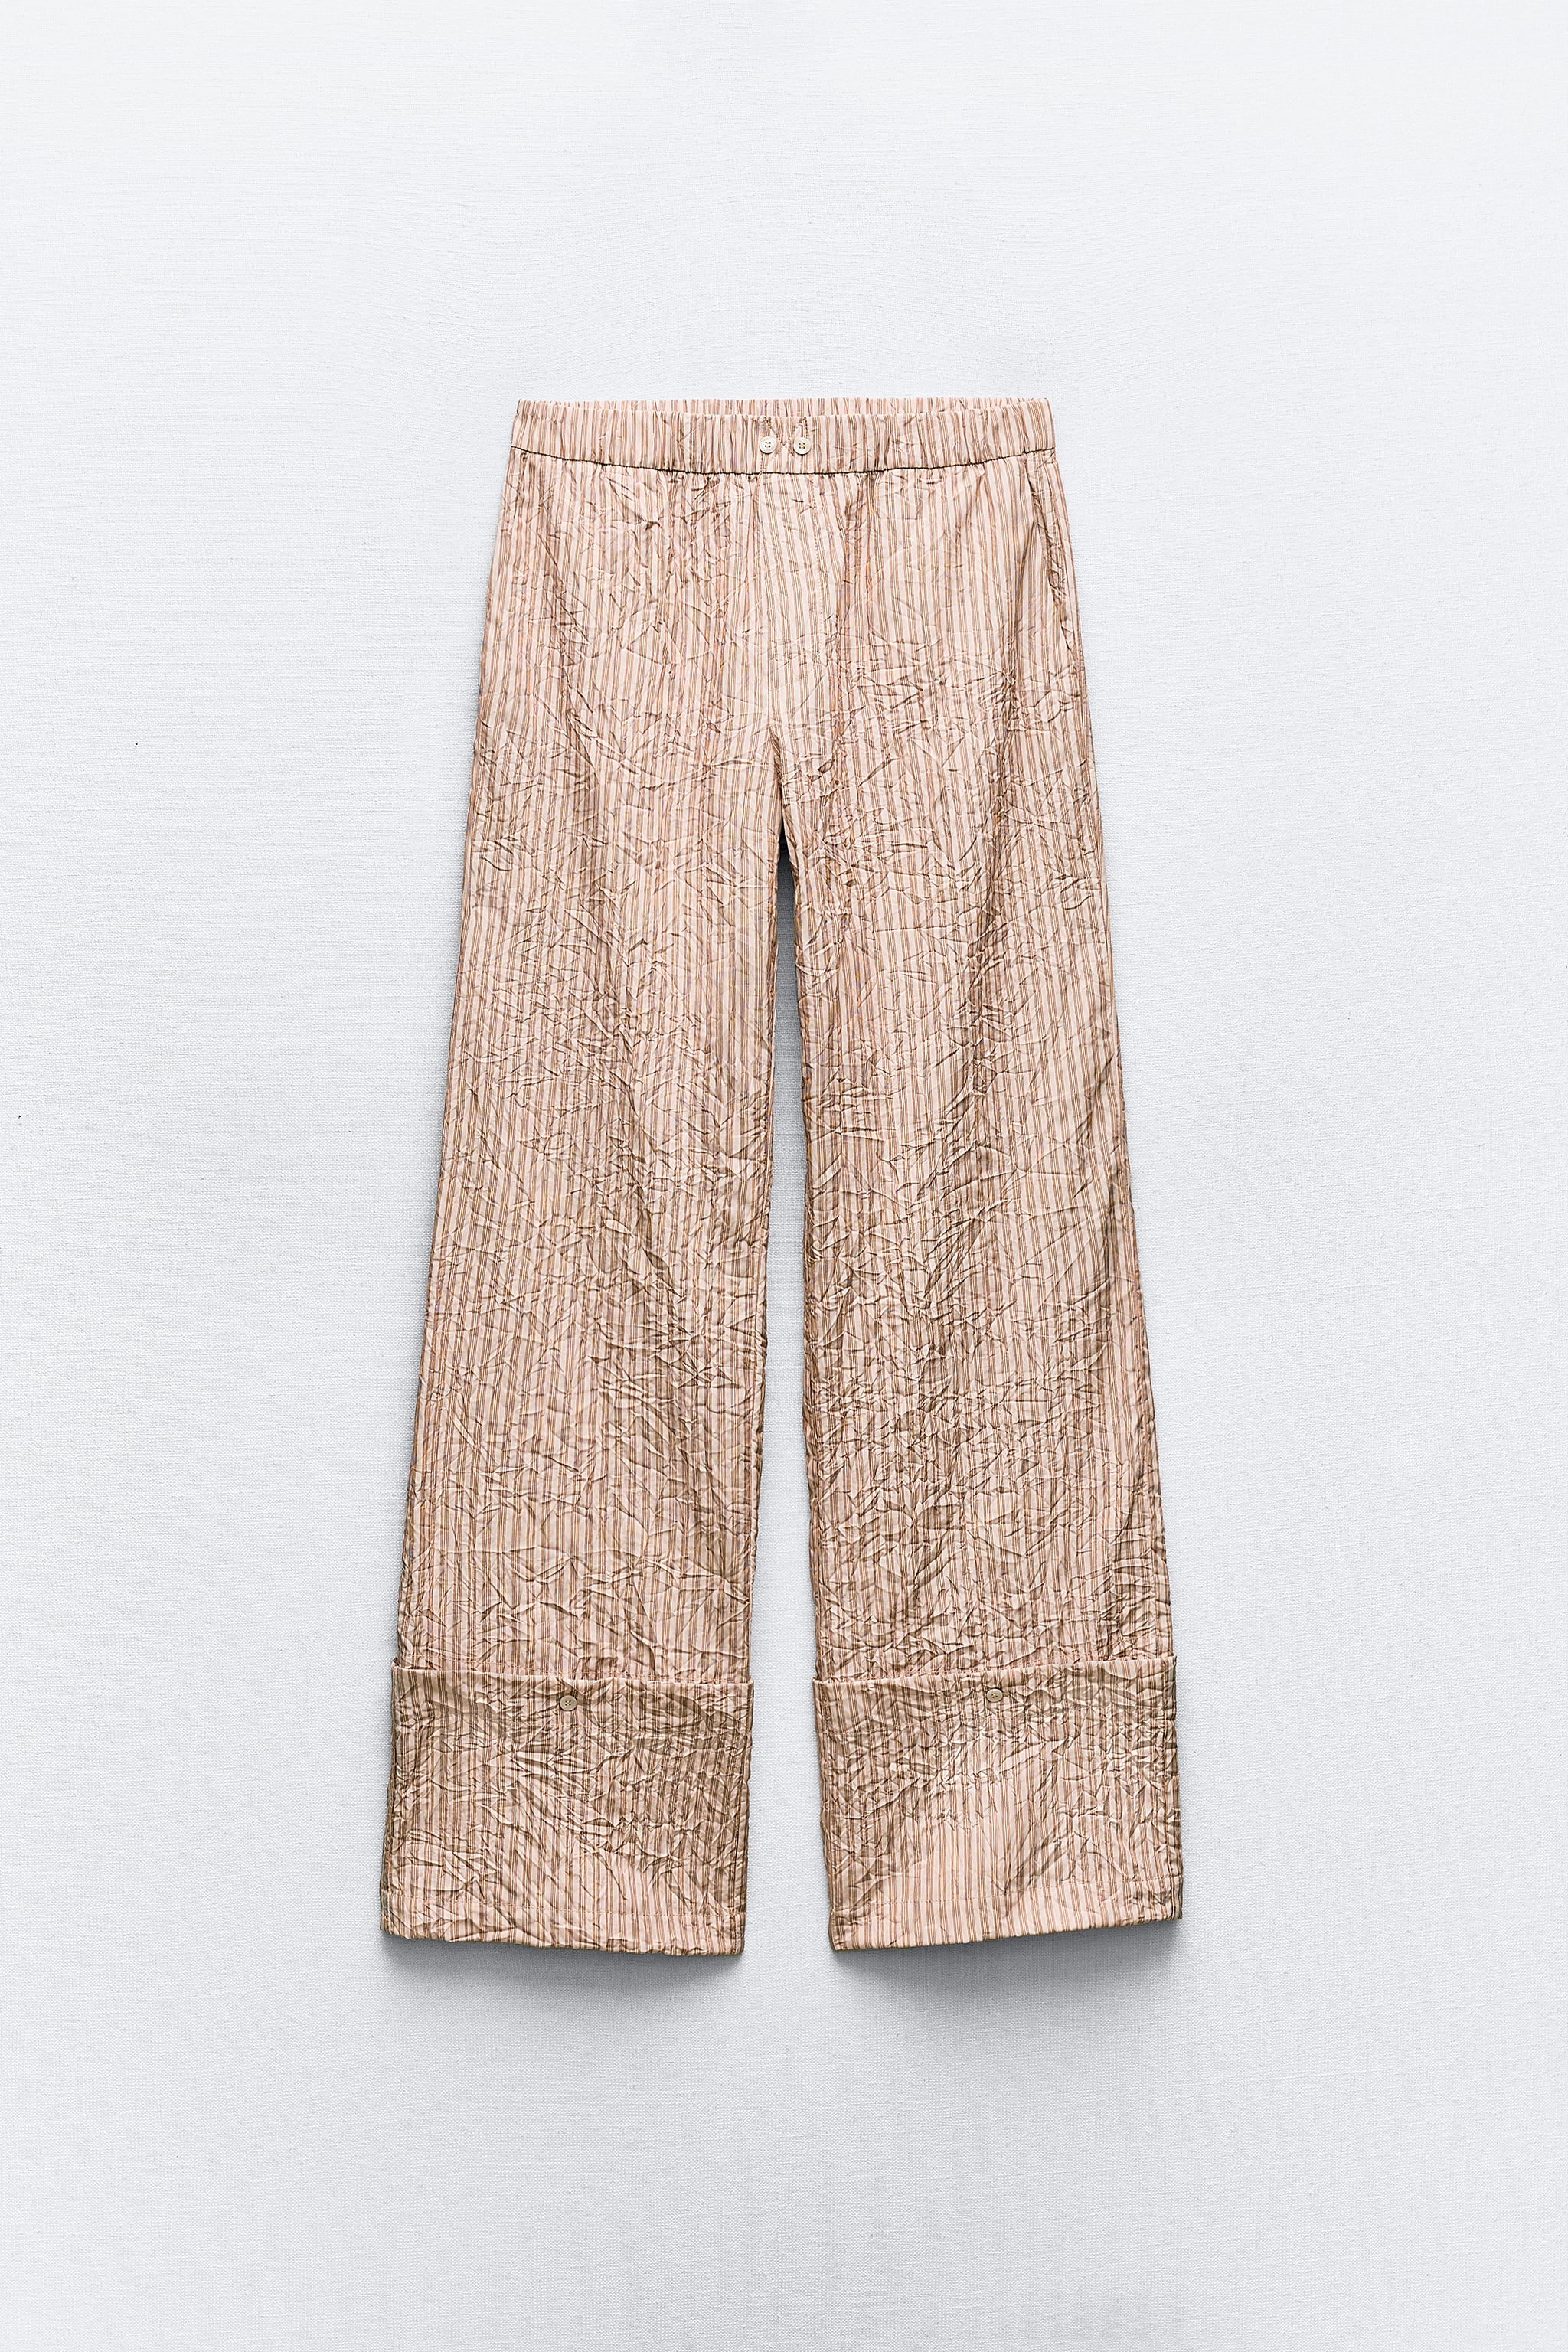 WRINKLE EFFECT CONVERTIBLE MULTIPOSITIONAL STRIPED PANTS